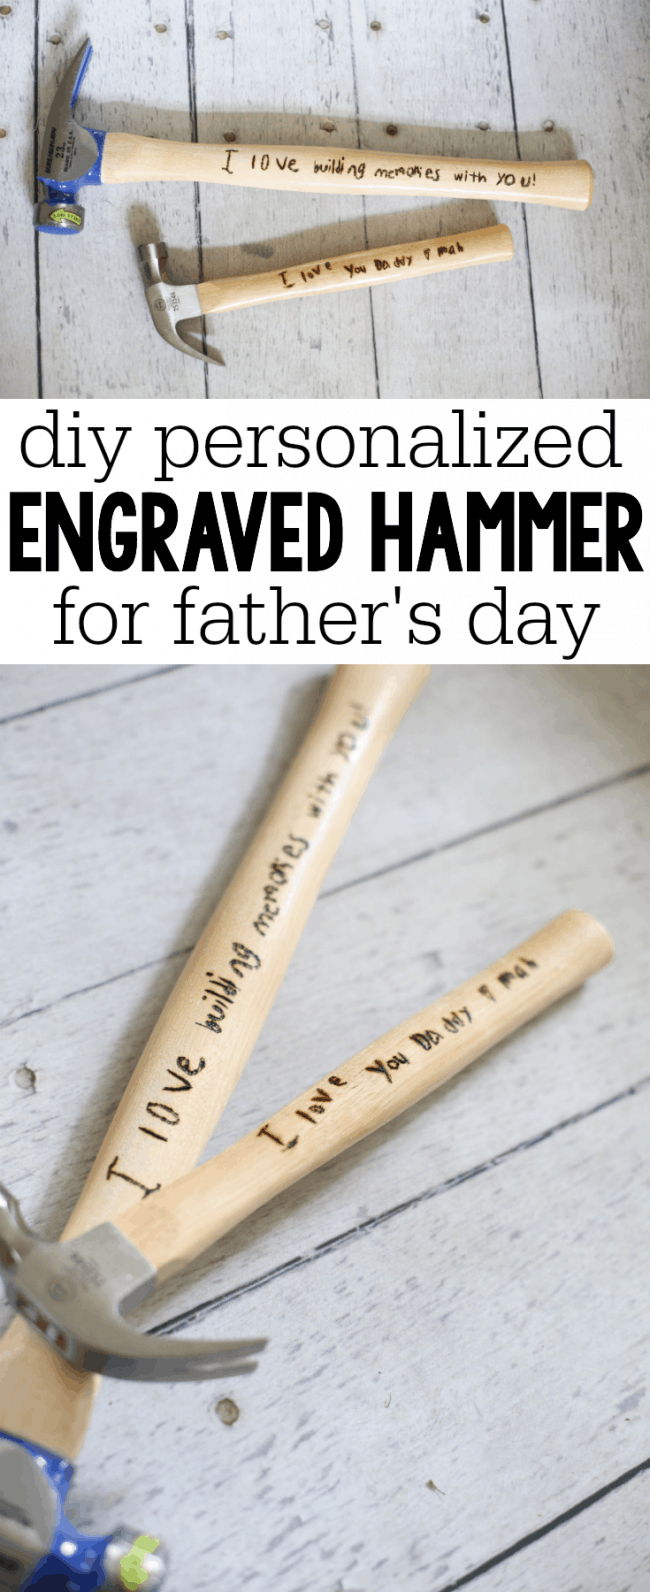 DIY Personalized Engraved Hammer for Father's Day